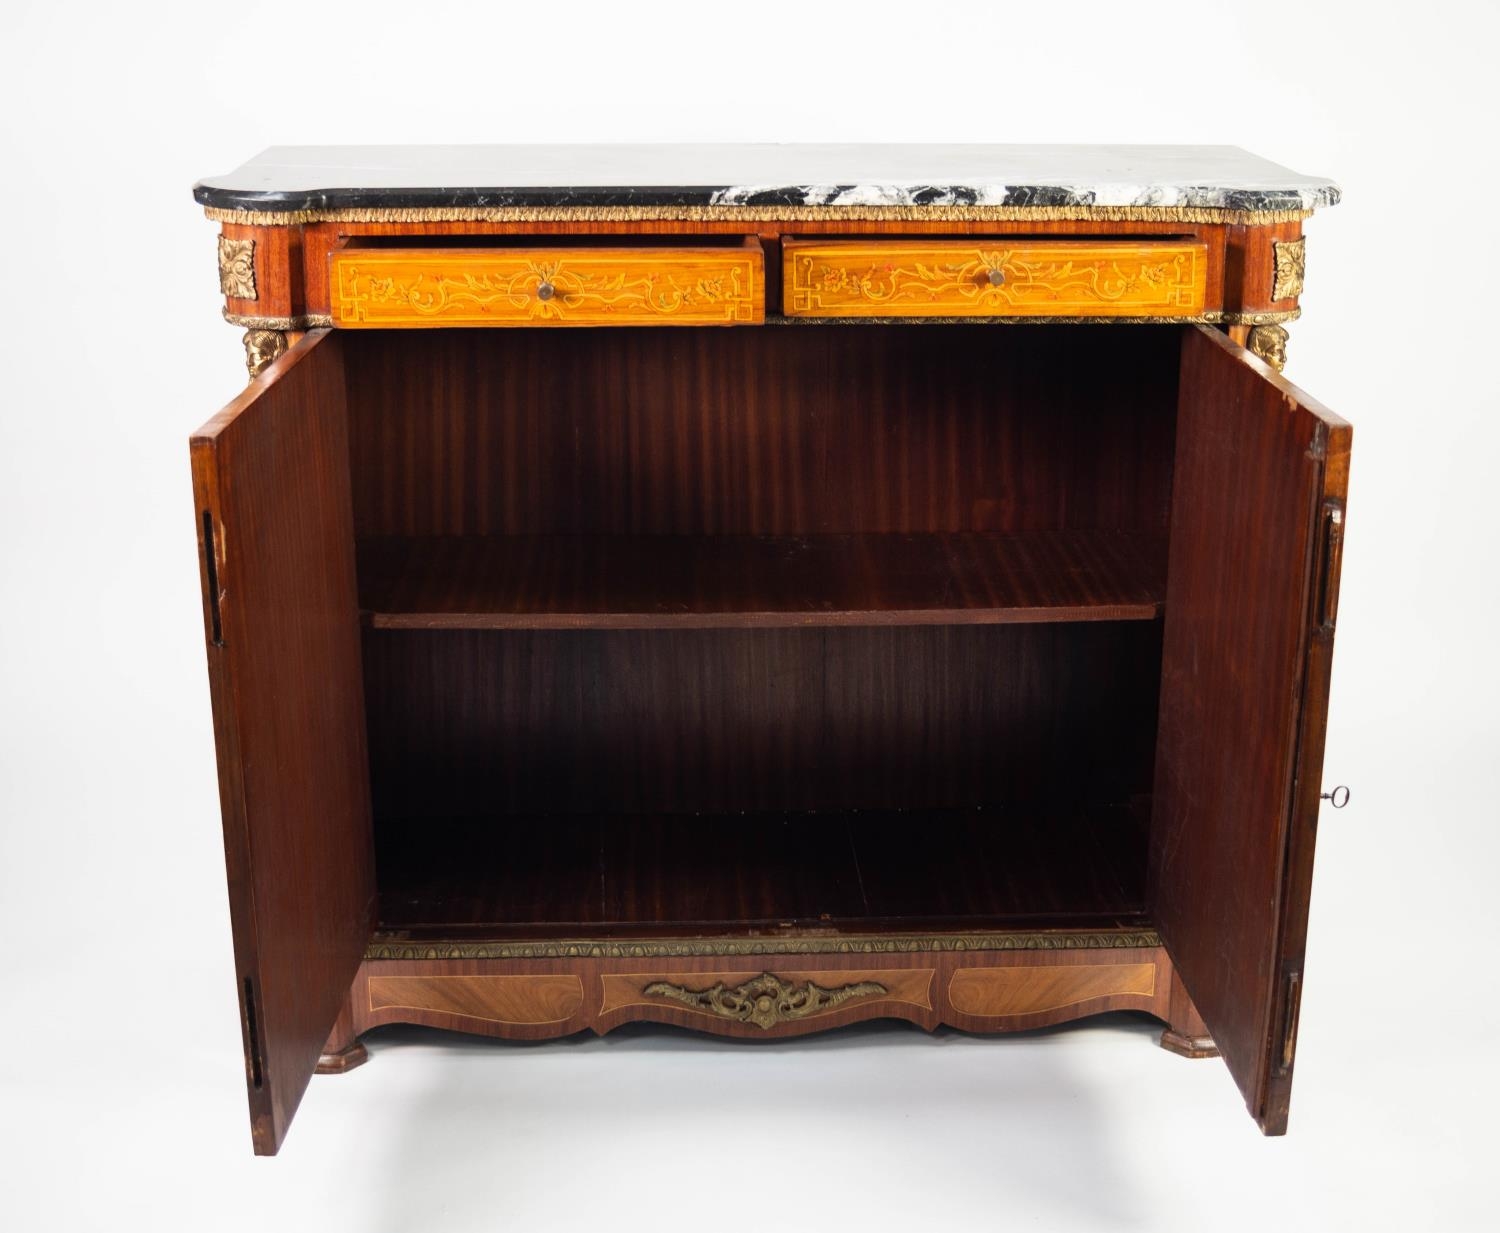 TWENTIETH CENTURY CONTINENTAL GILT METAL MOUNTED MAHOGANY AND INLAID SIDE CABINET WITH BLACK - Image 4 of 4